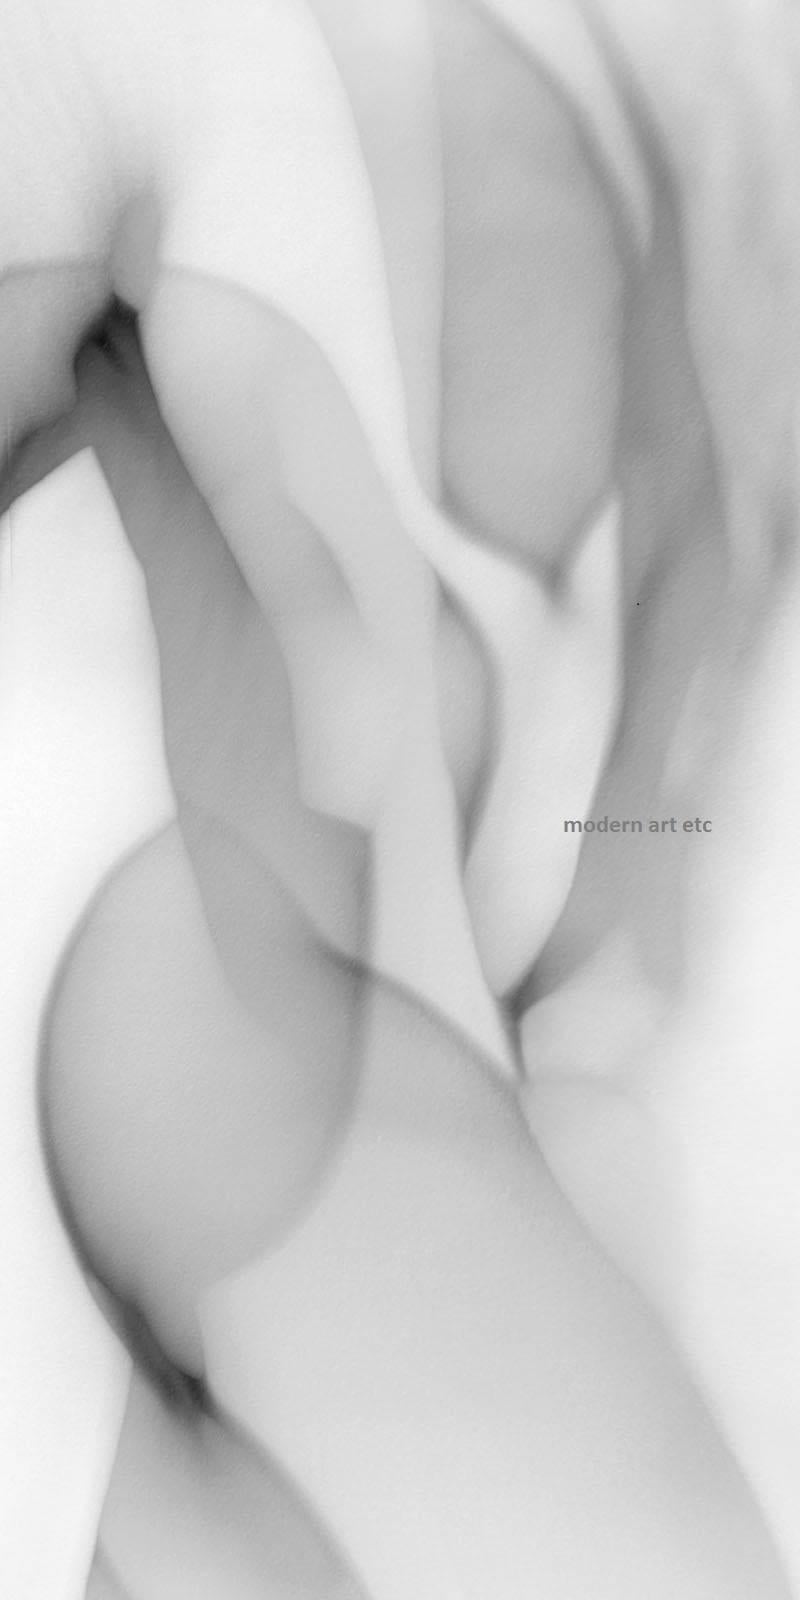 Light Imitating Art Series - Venus, and other variety - Abstract Photograph by Gillian Lindsay